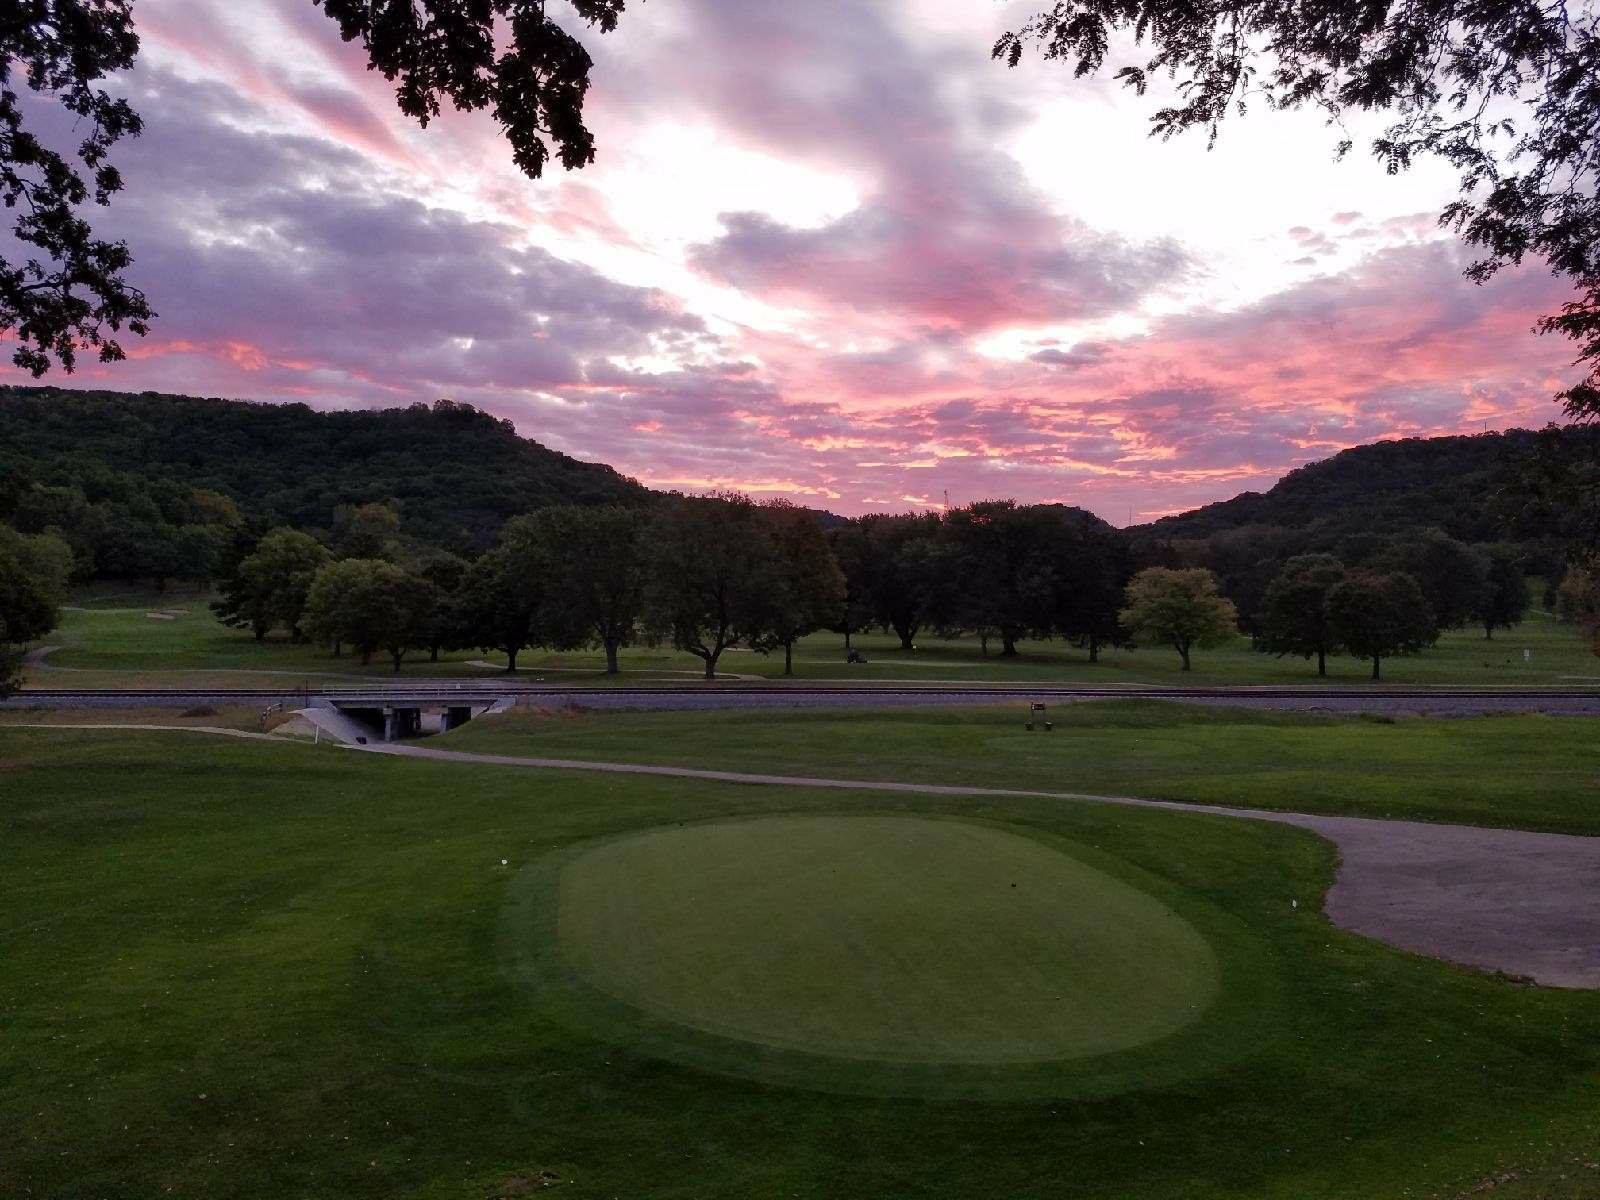 City on track to re-up with group to run Forest Hills G.C. for another 10 years